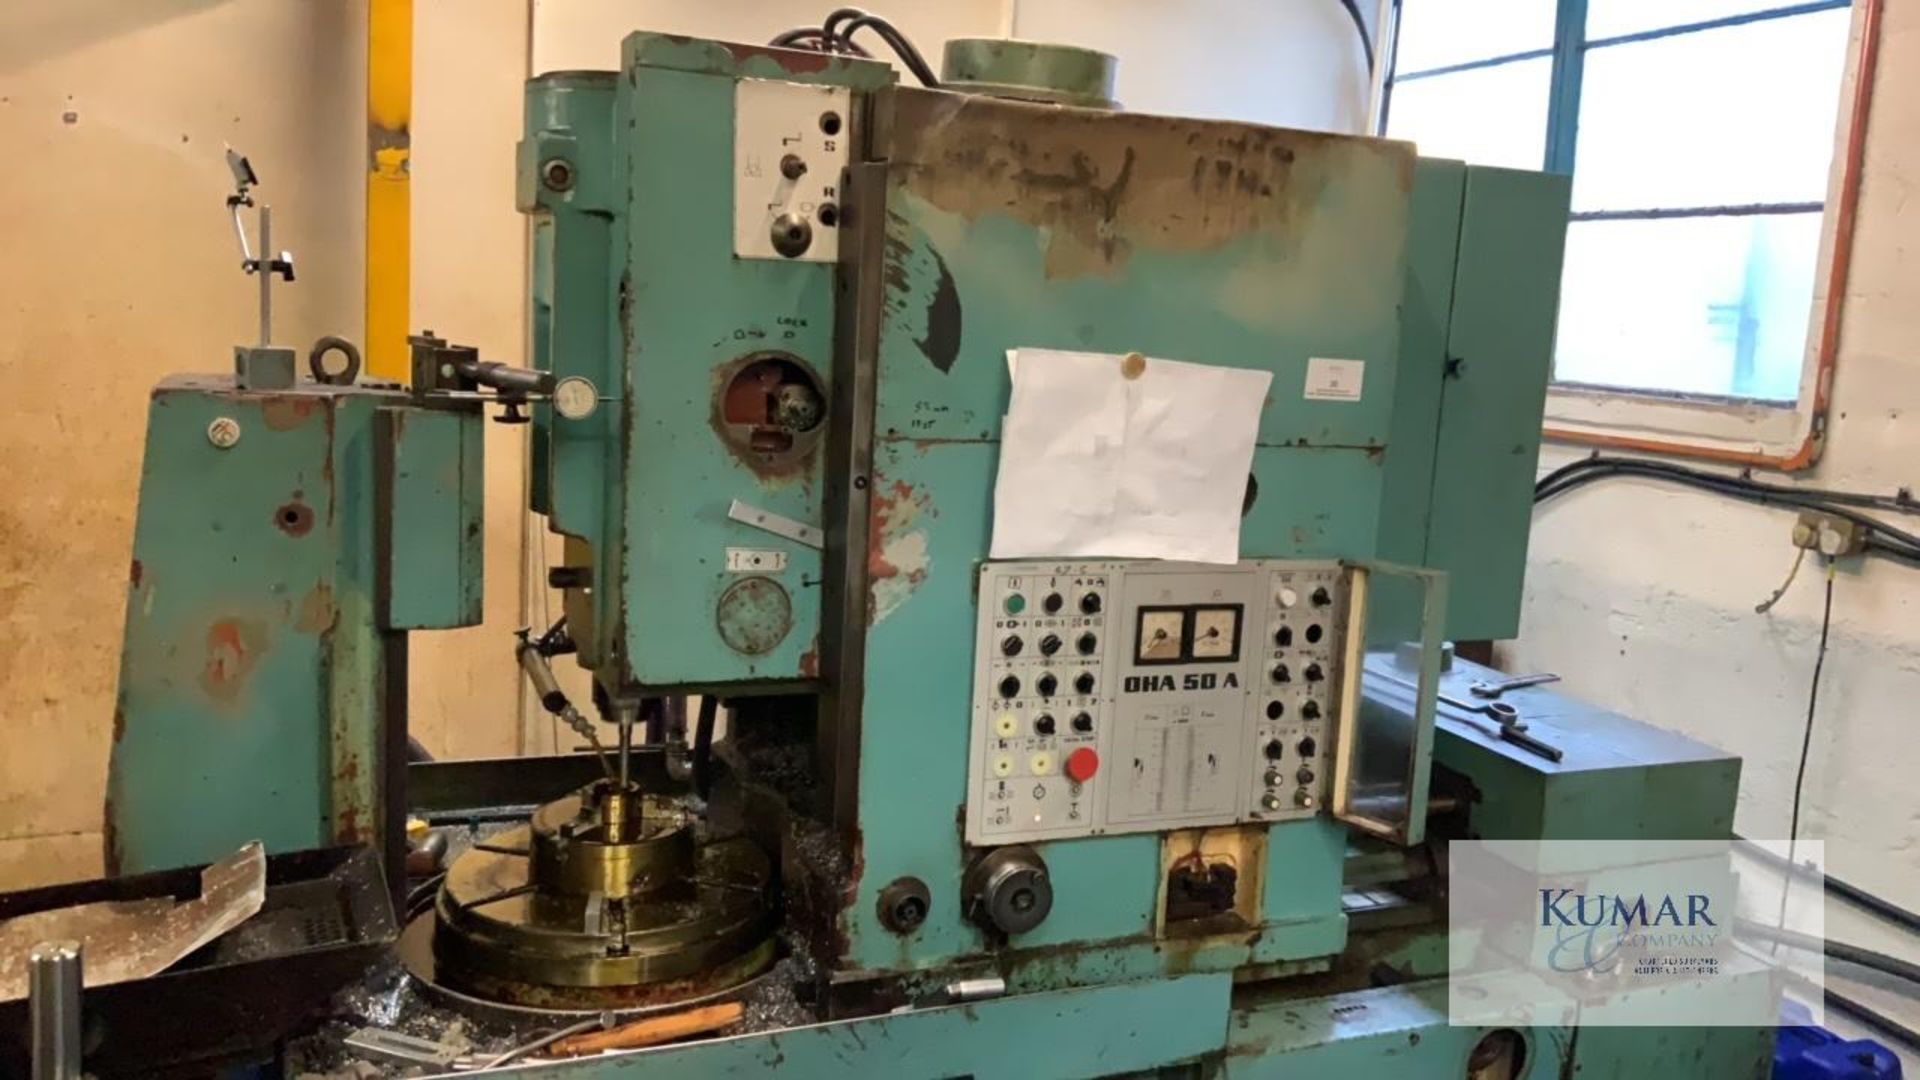 Tos Model No OHA 50 A Gear shaping machine with change gears - Collection Date Thursday 3rd March